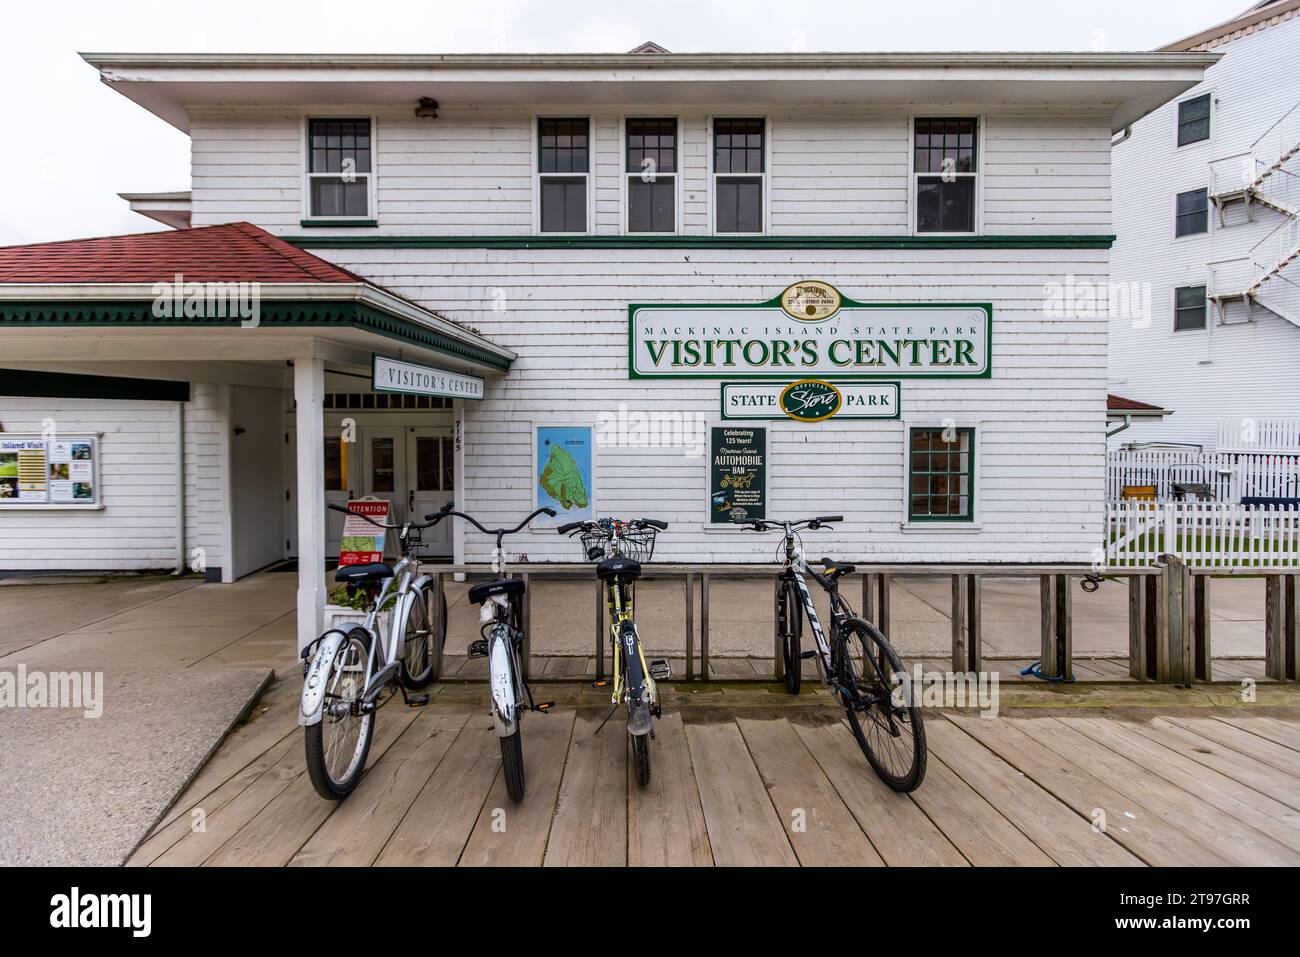 Visitor Center on Main Street with bicycles parked Here visitors can get information about all the attractions in Mackinac Island State Park. Mackinac Island, Michigan, United States Stock Photo